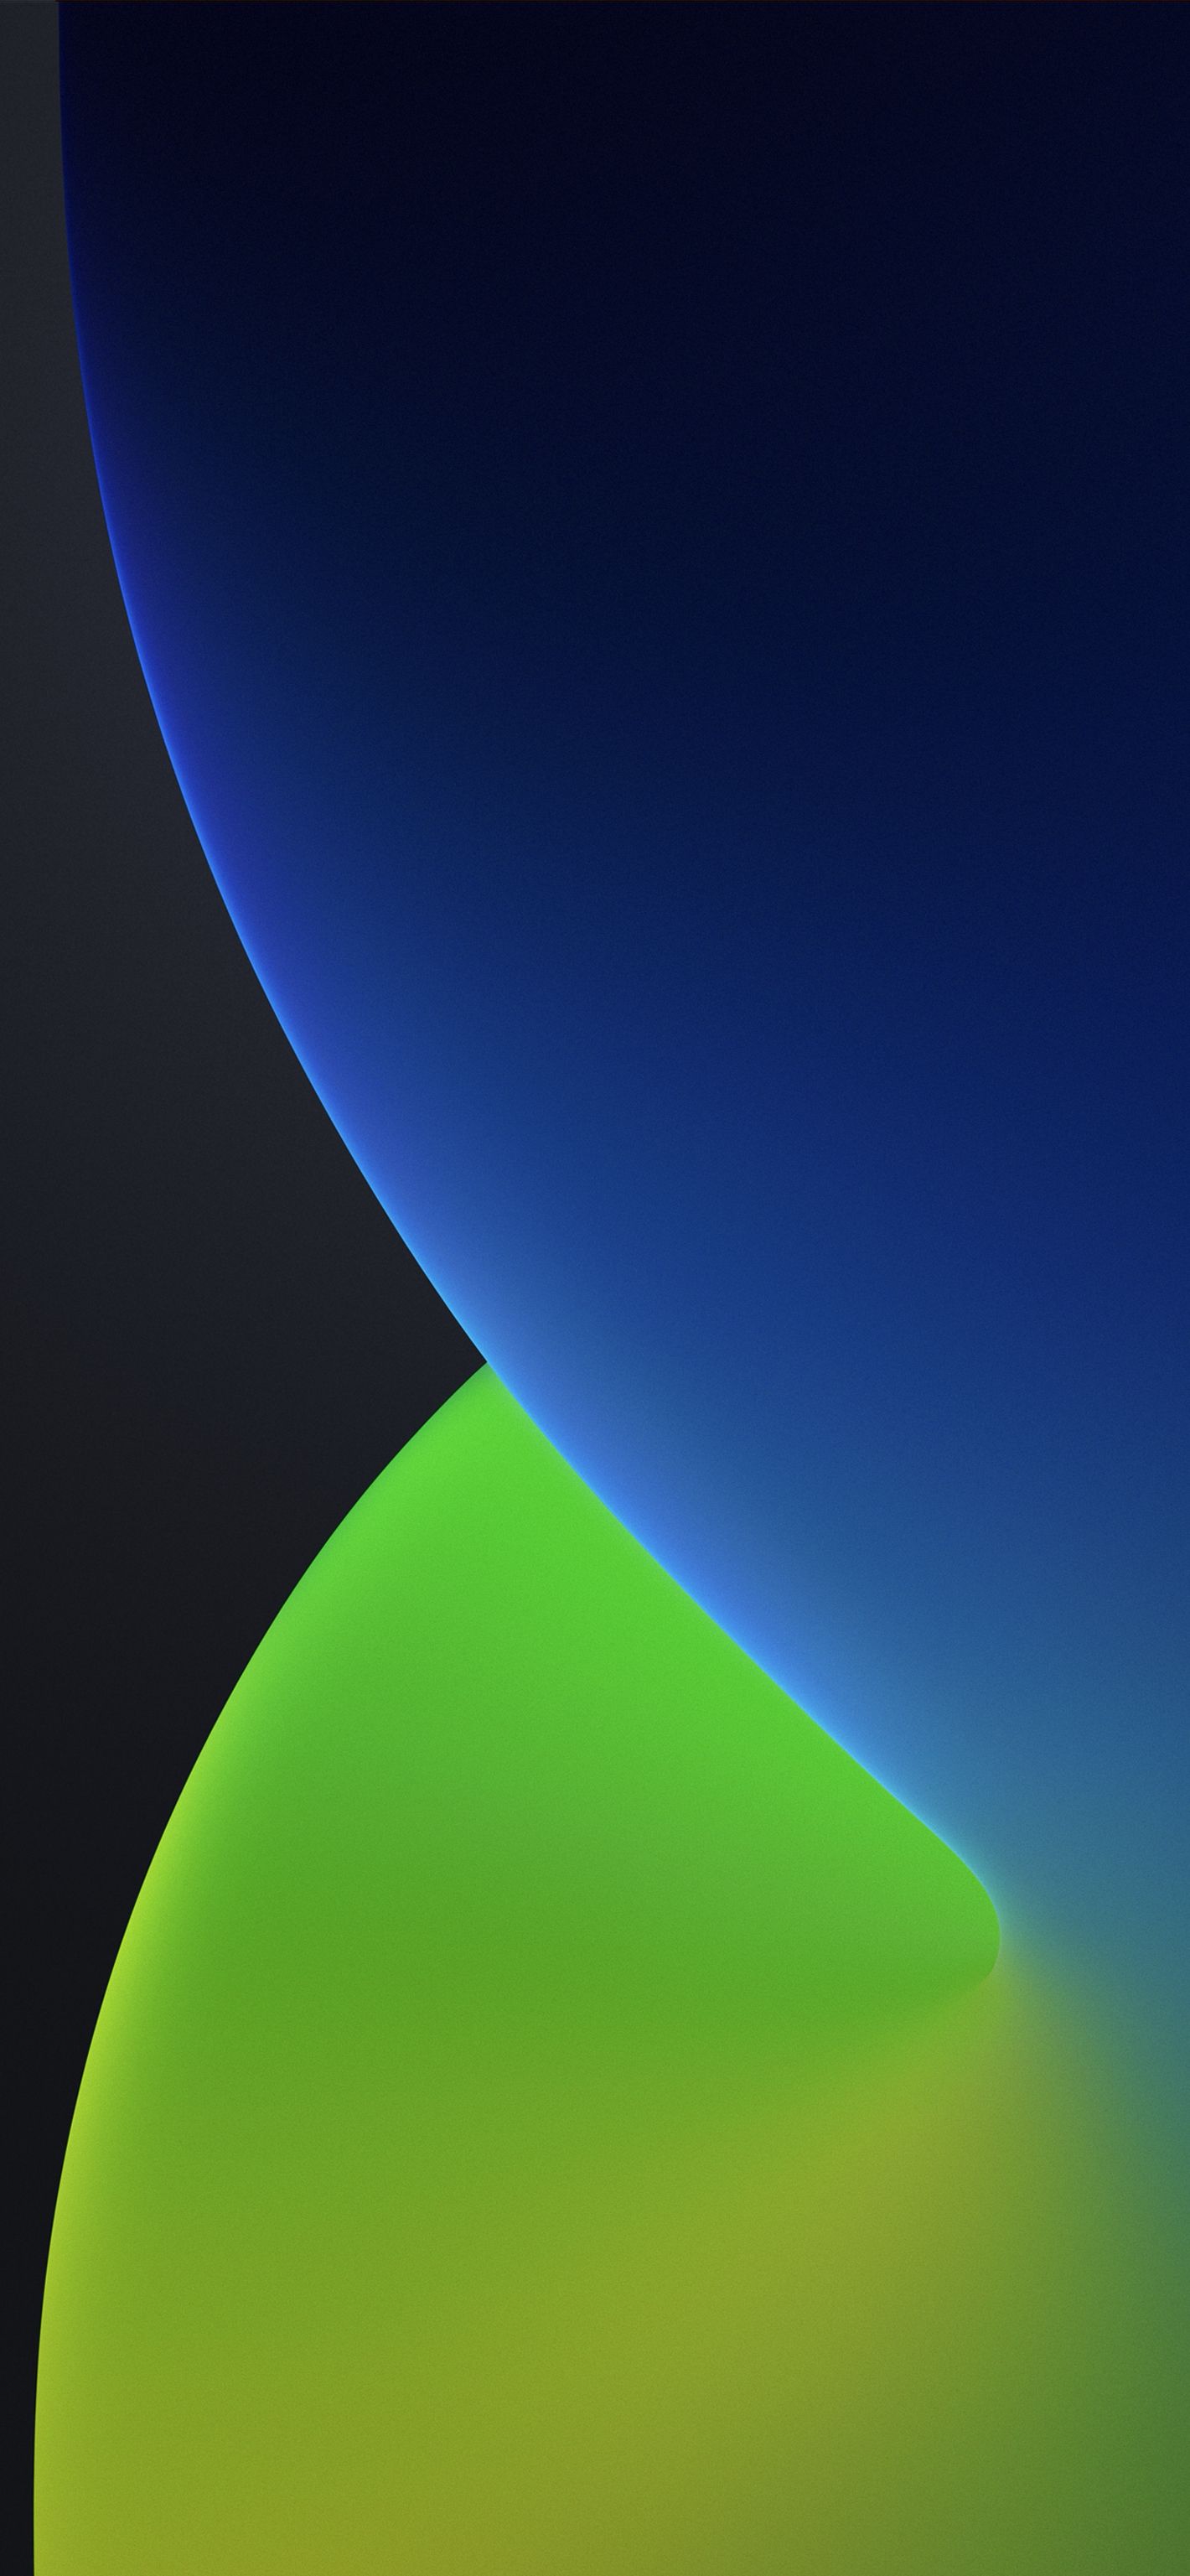 iOS 14 wallpapers for iPhone & iPad